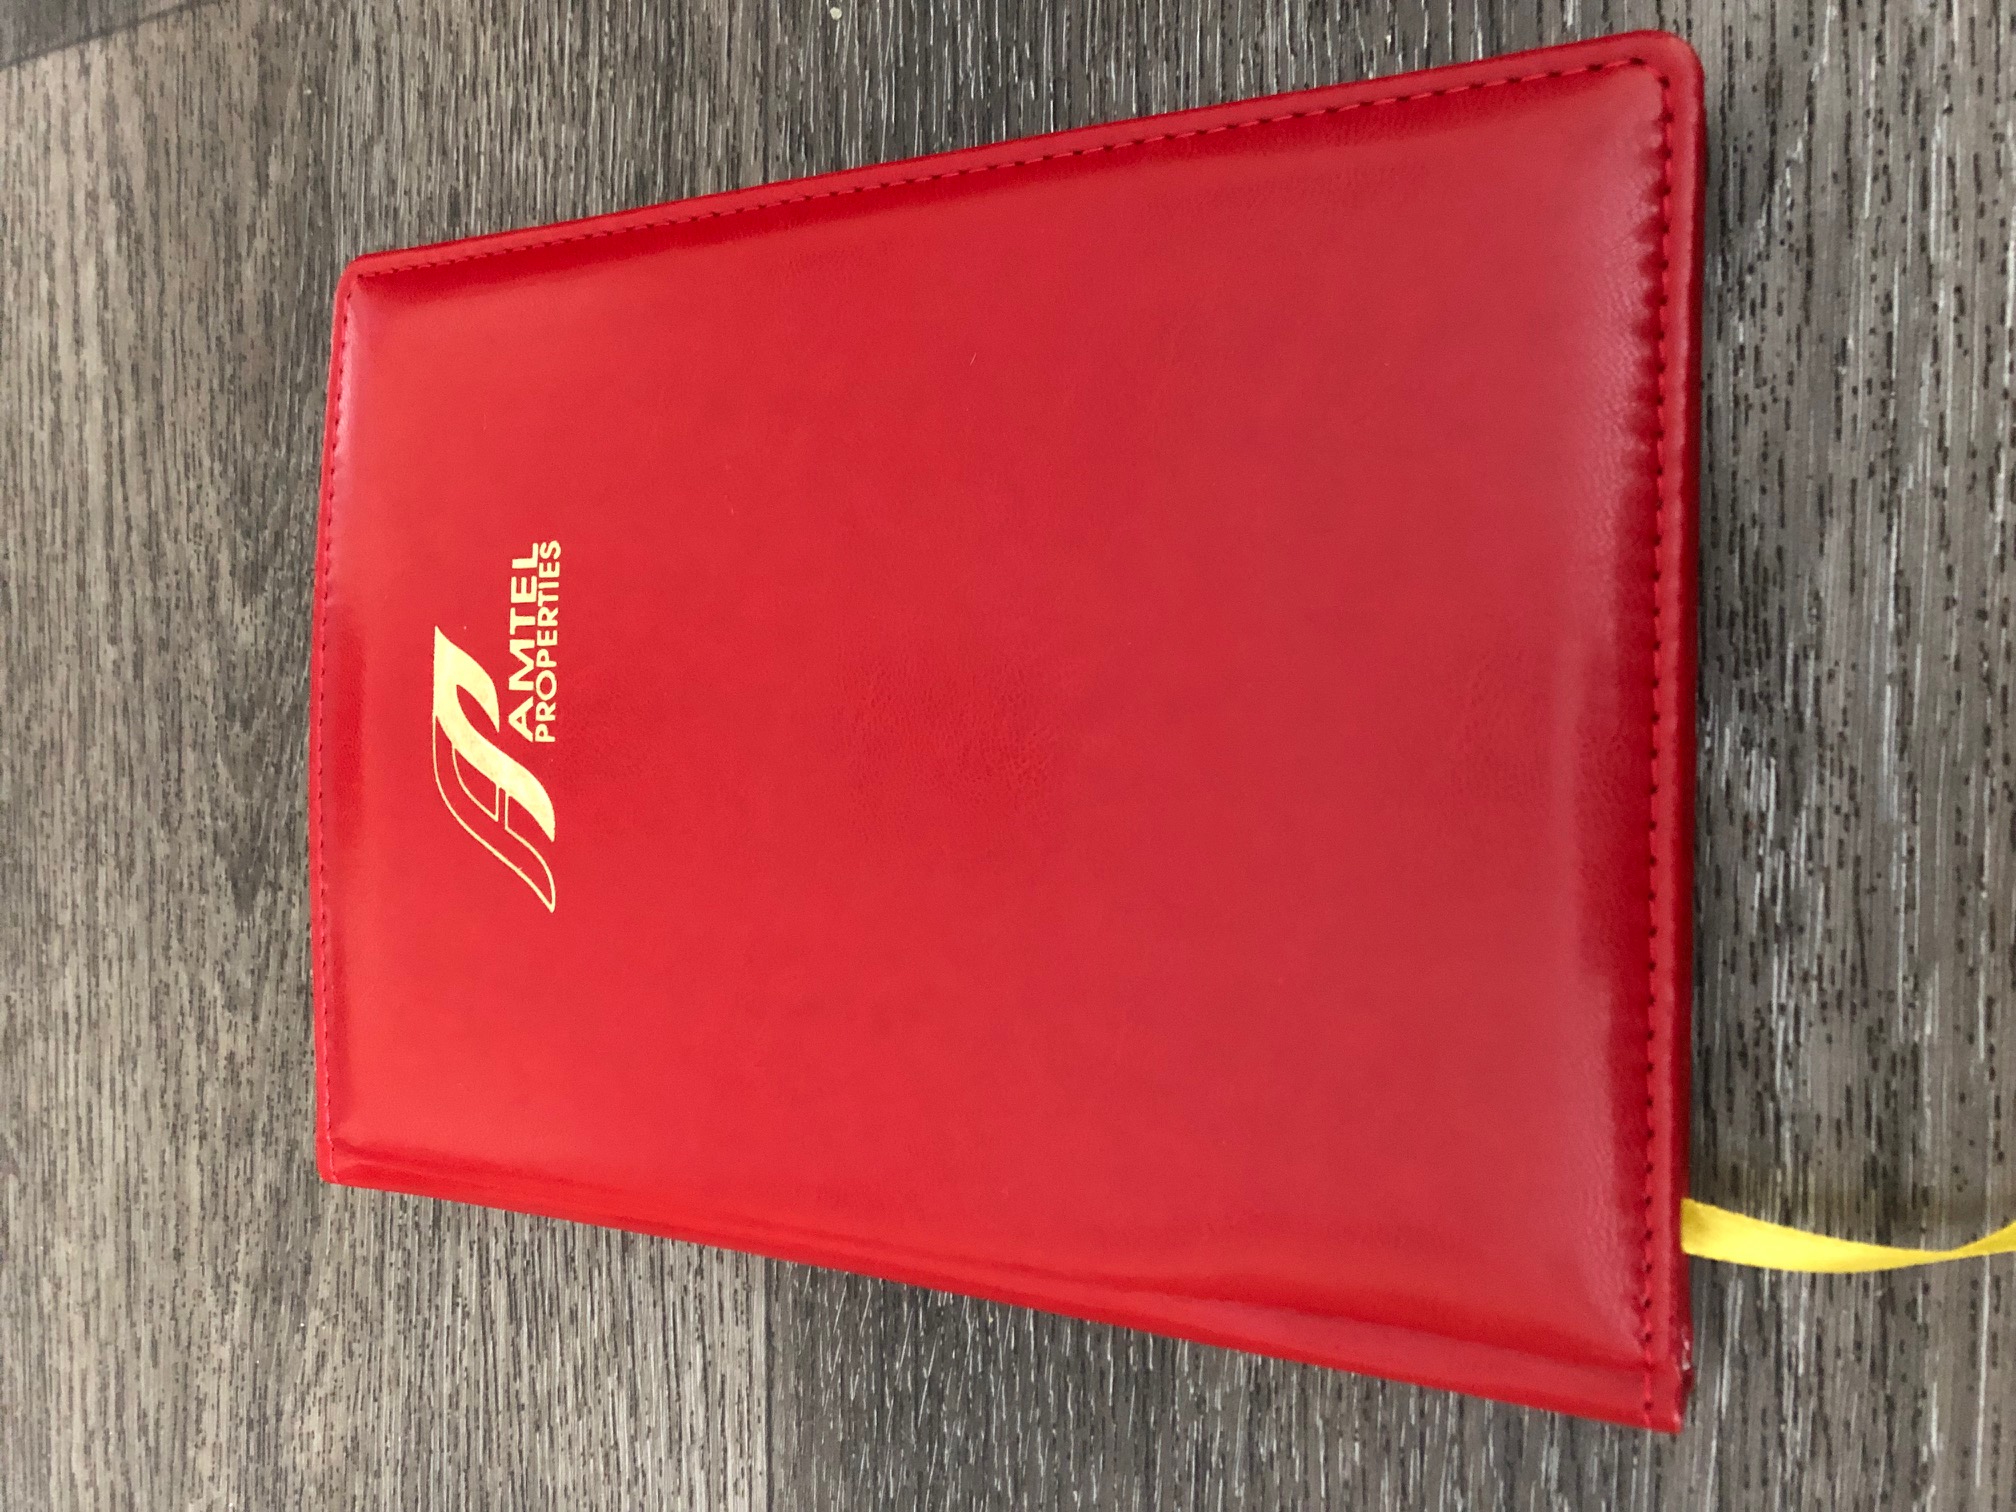 Corporate diaries with logo on cover & pages